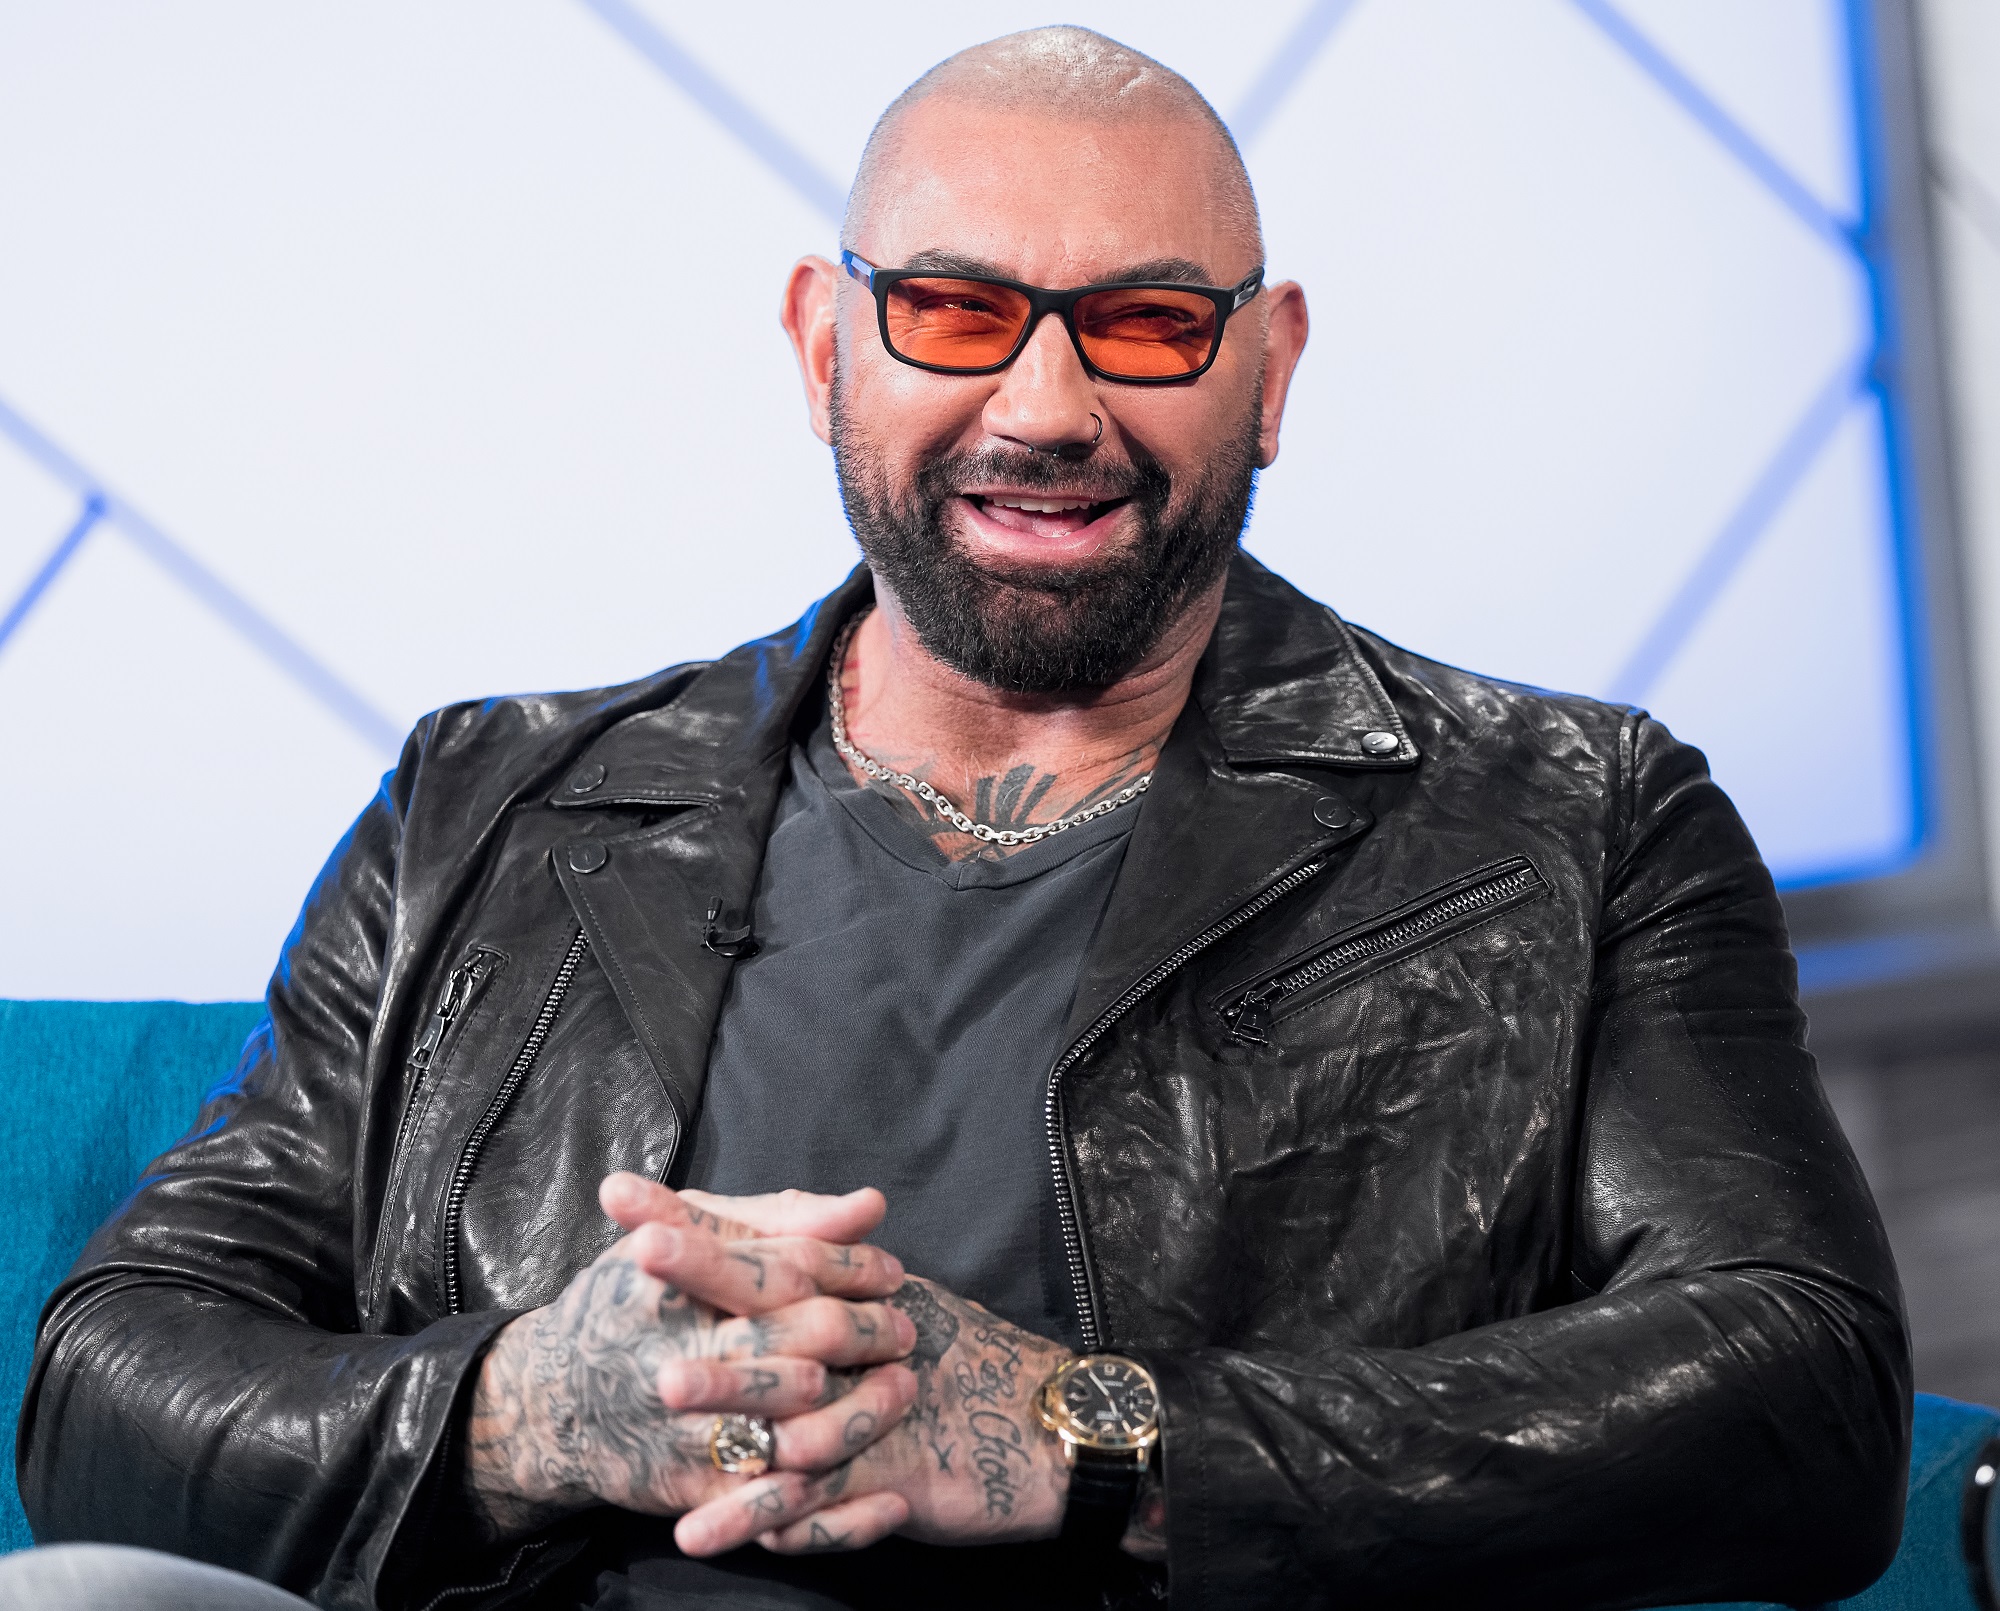 ‘WWE Backlash 2021’: Dave Batista Wants These Wrestlers For a Zombie Apocalypse